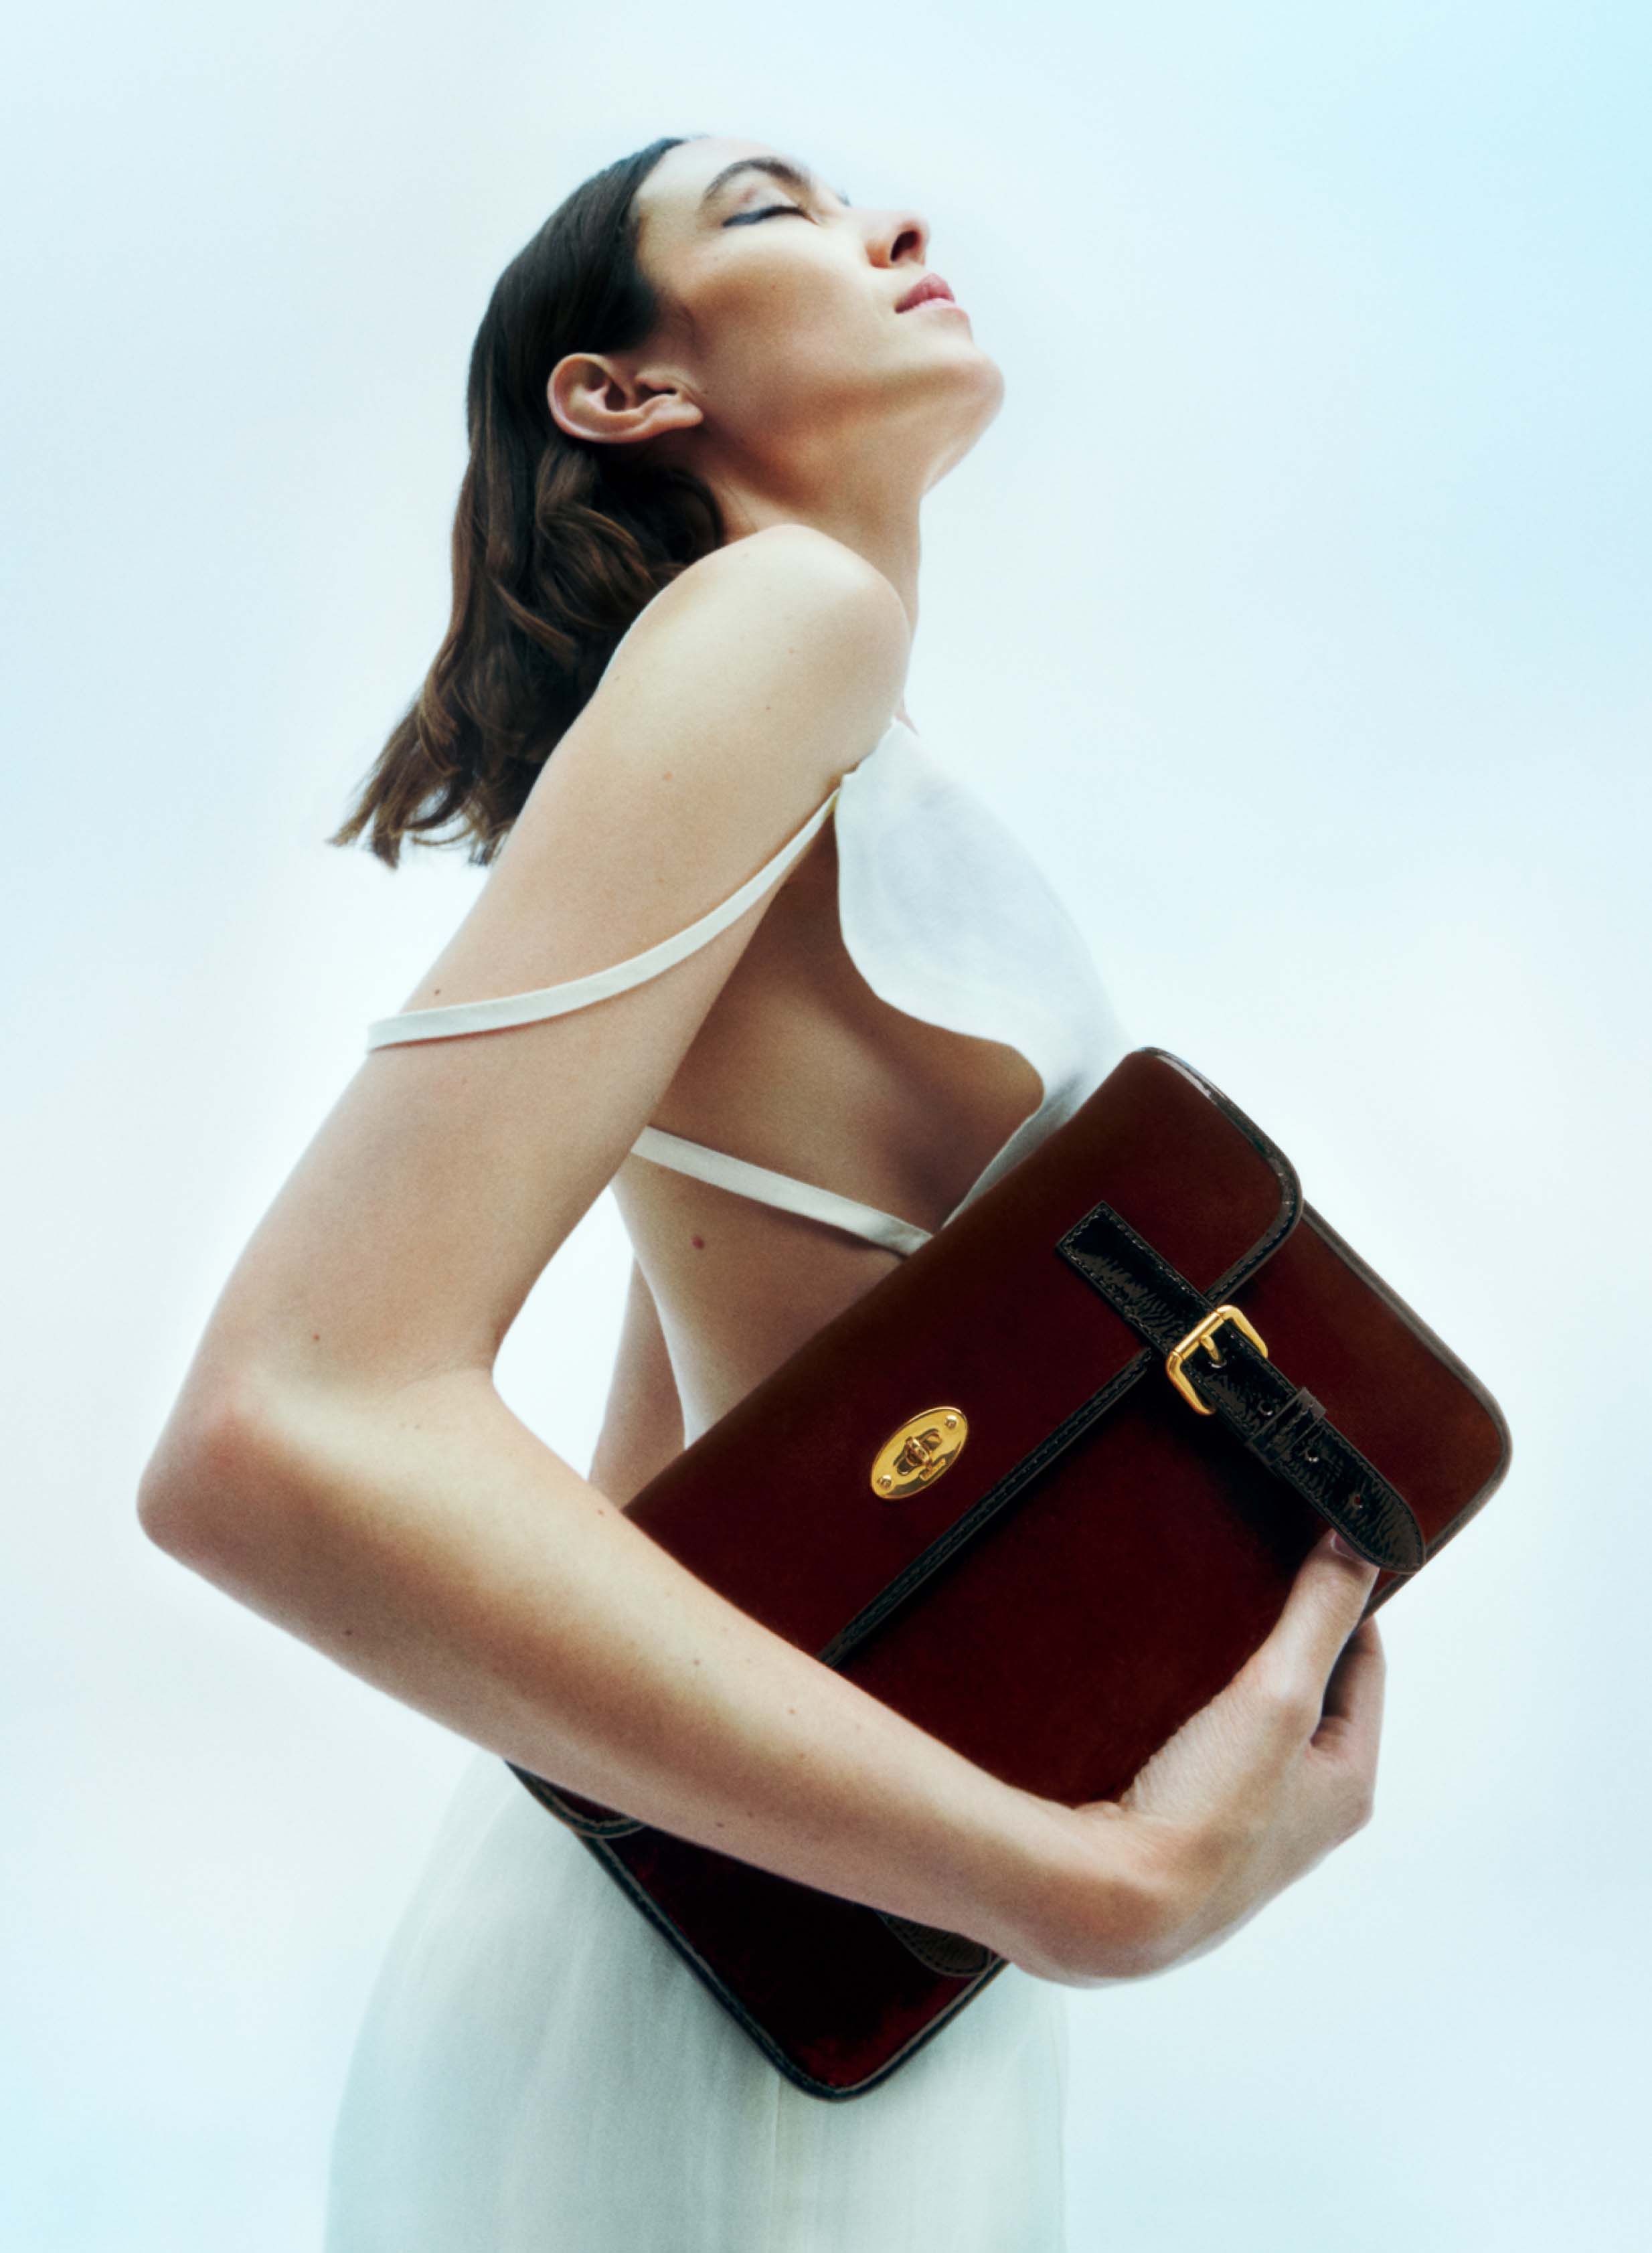 Chung collaborates with Mulberry, a decade after the Alexa bag was first launched